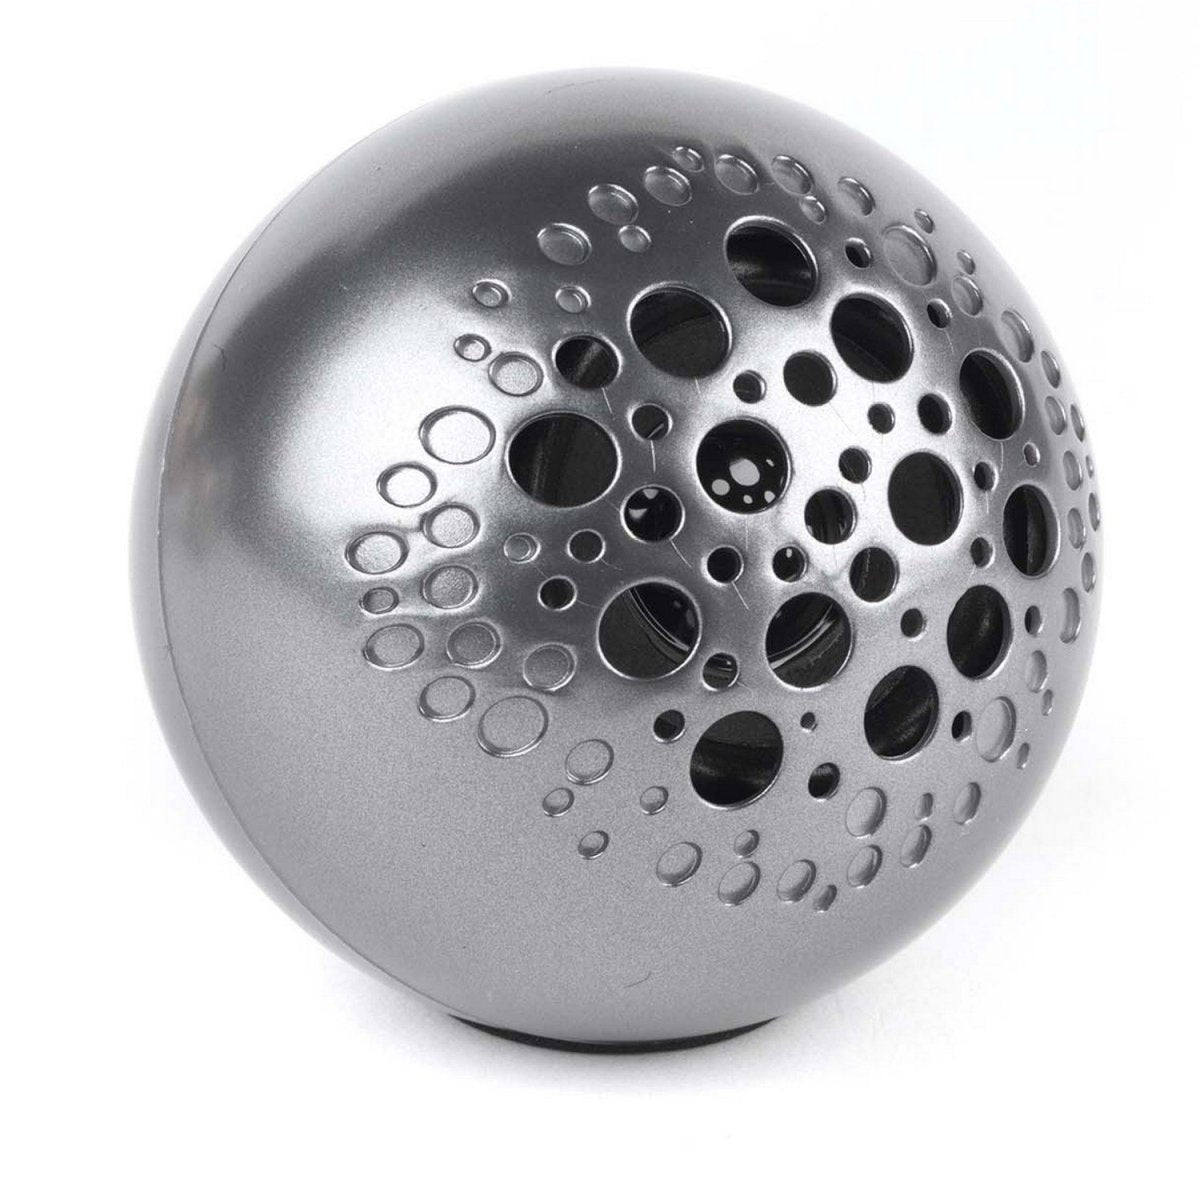 Intempo Portable Bluetooth Rechargeable Ball Speaker Grey - Bonnypack